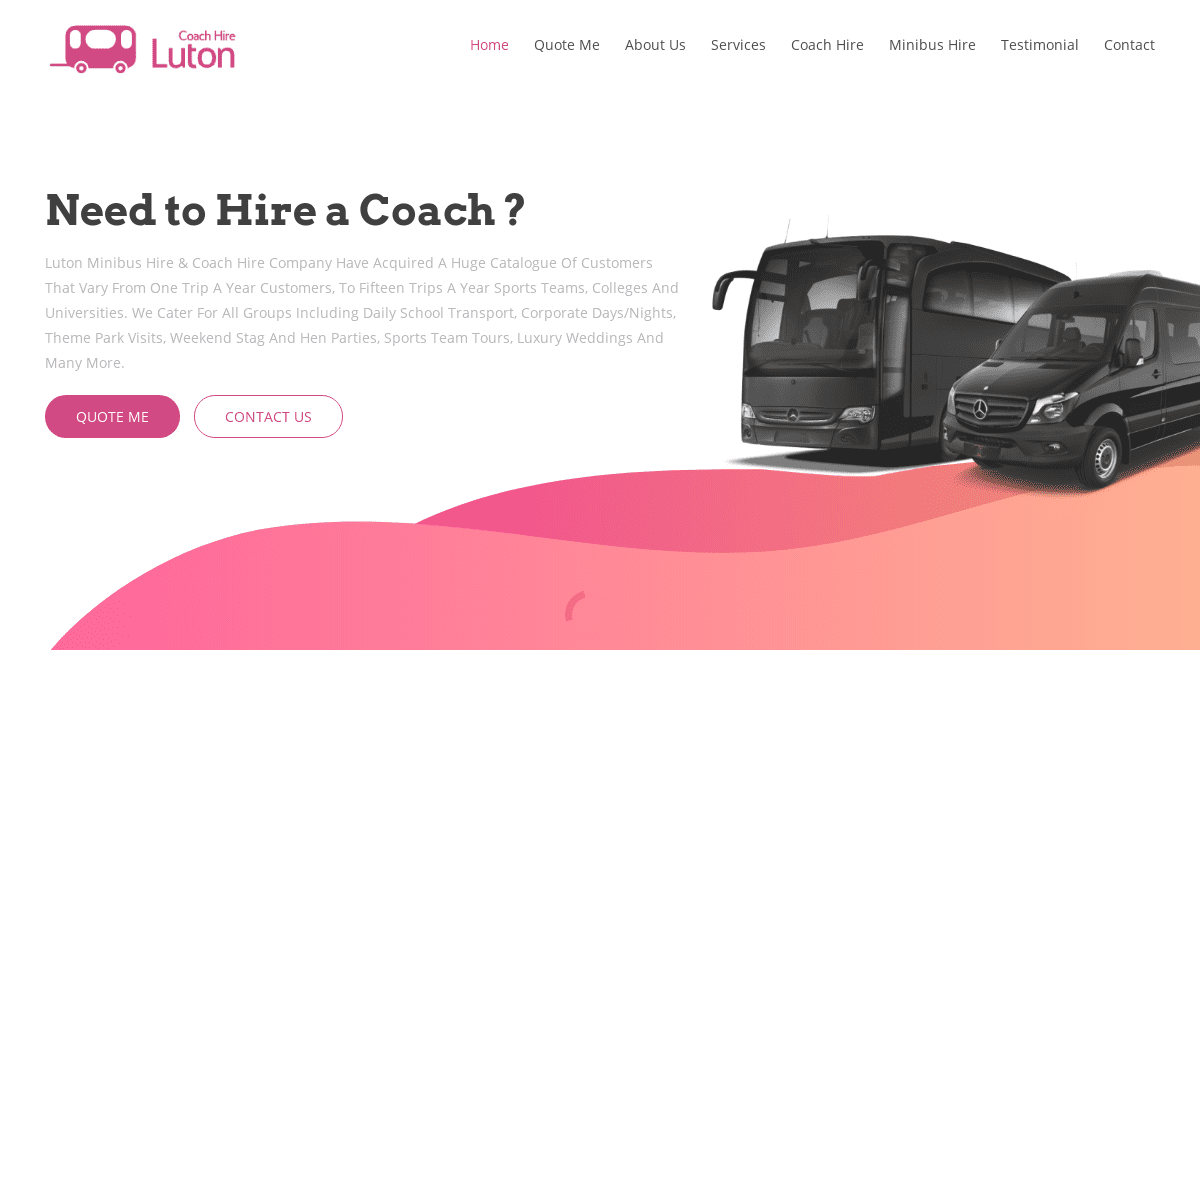 A complete backup of https://coachhire-luton.co.uk